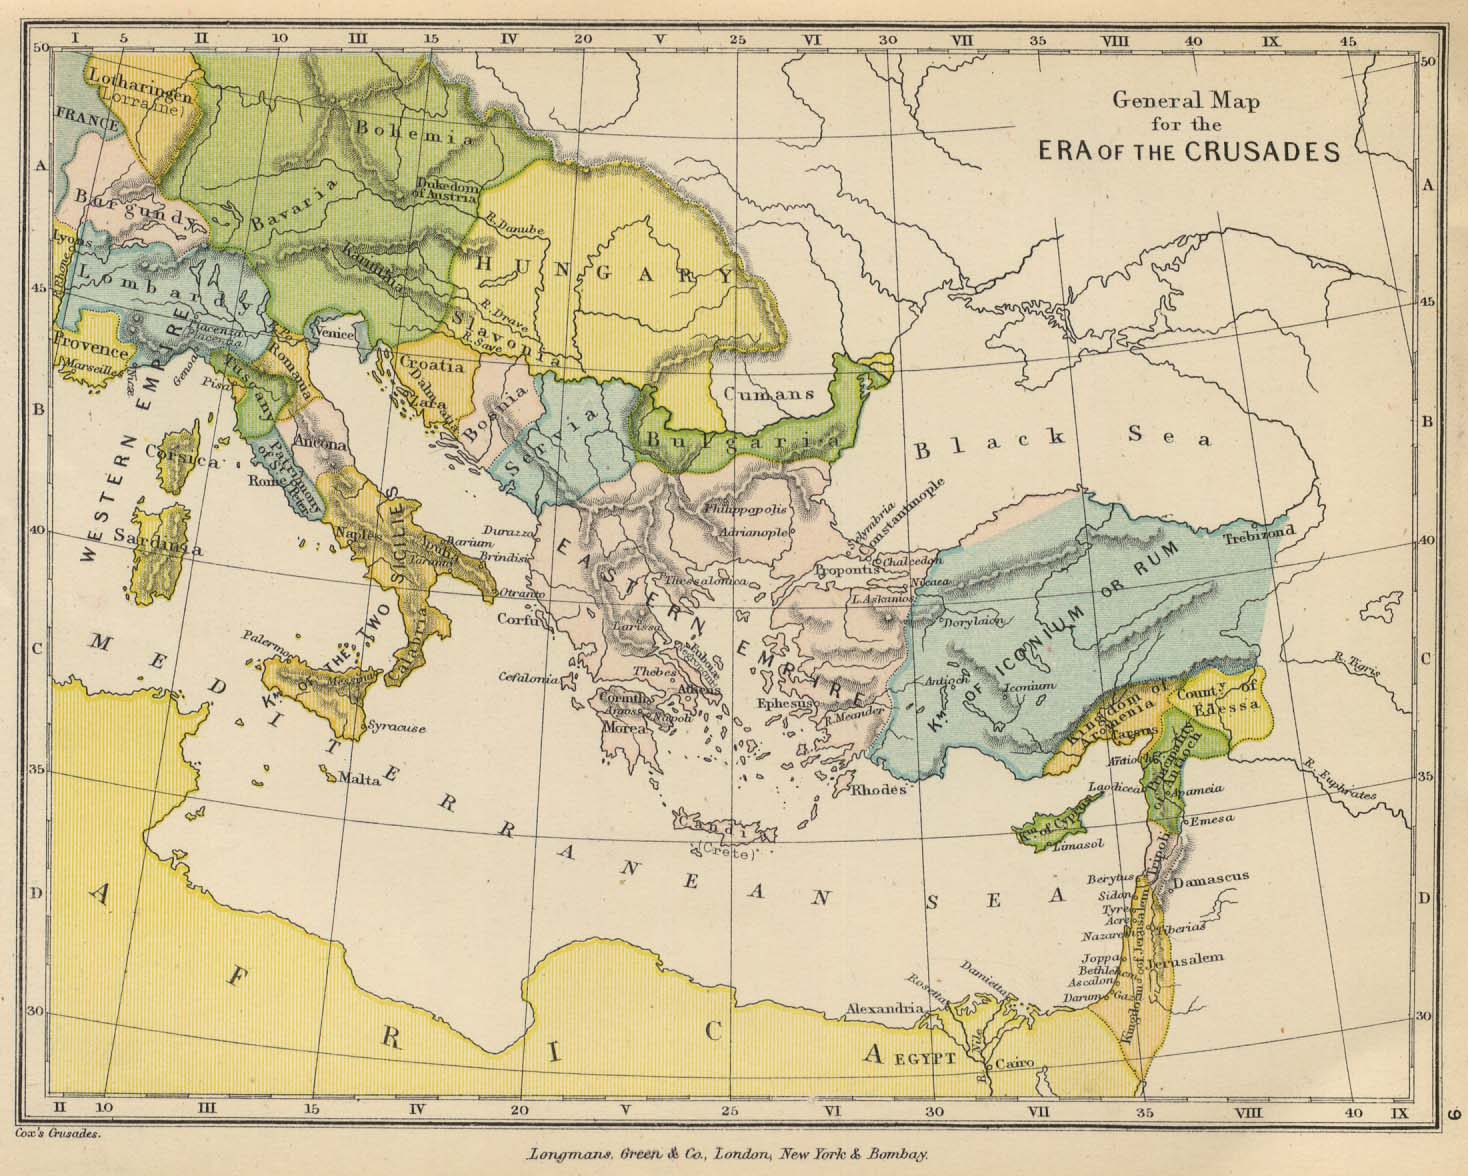 Historical Map of Balkan Europe - Crusades Era [includes Balkans] (253K) From 'The Public Schools Historical Atlas' edited by C. Colbeck, published by Longmans, Green, and Co., 1905 